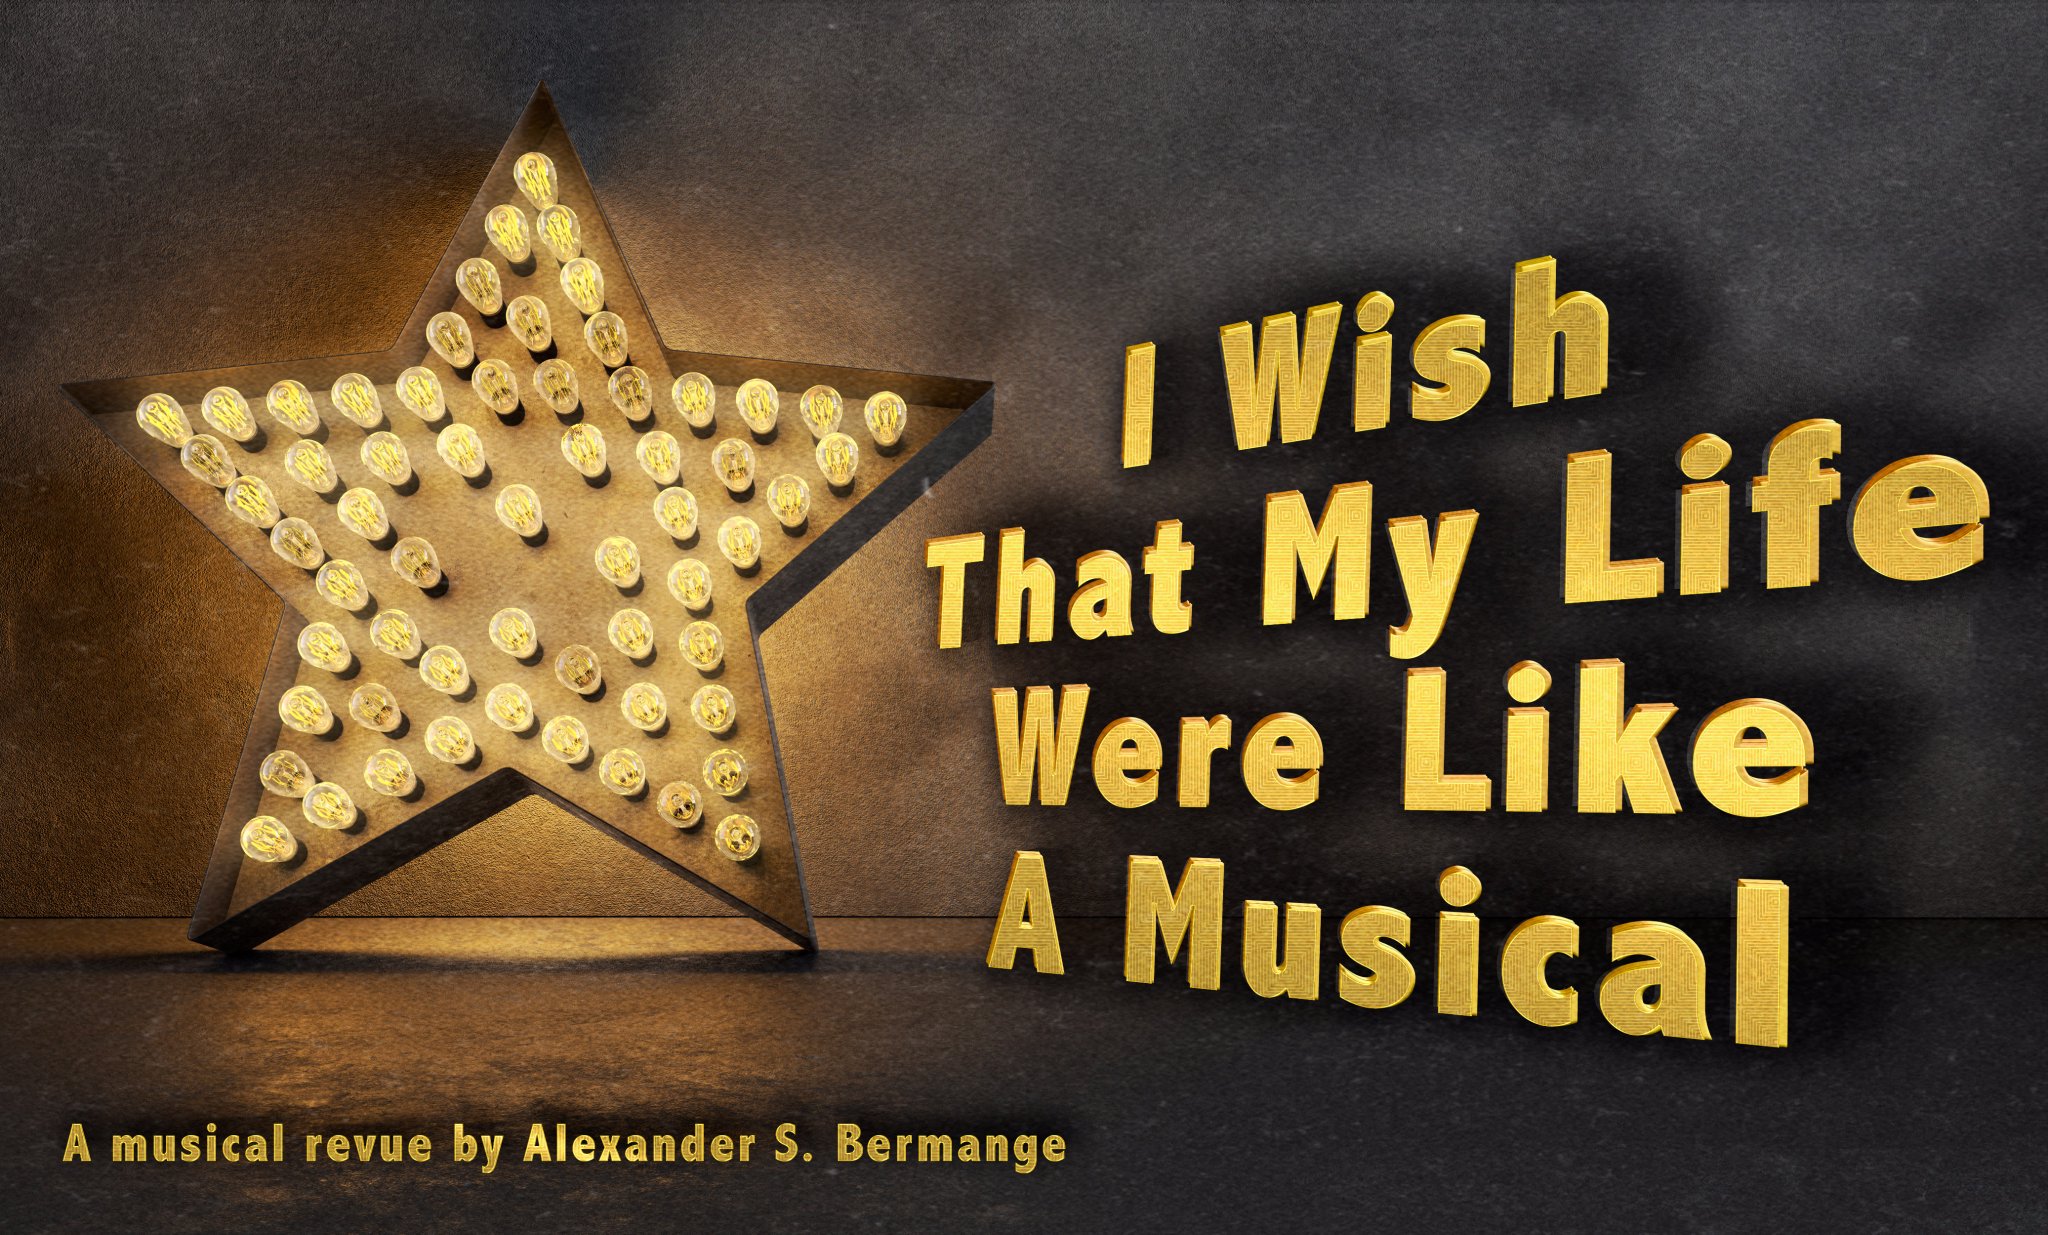 i-wish-my-life-were-like-a-musical-premiere-tons-of-stagefaves-cabarets-in-new-live-at-zedel-season